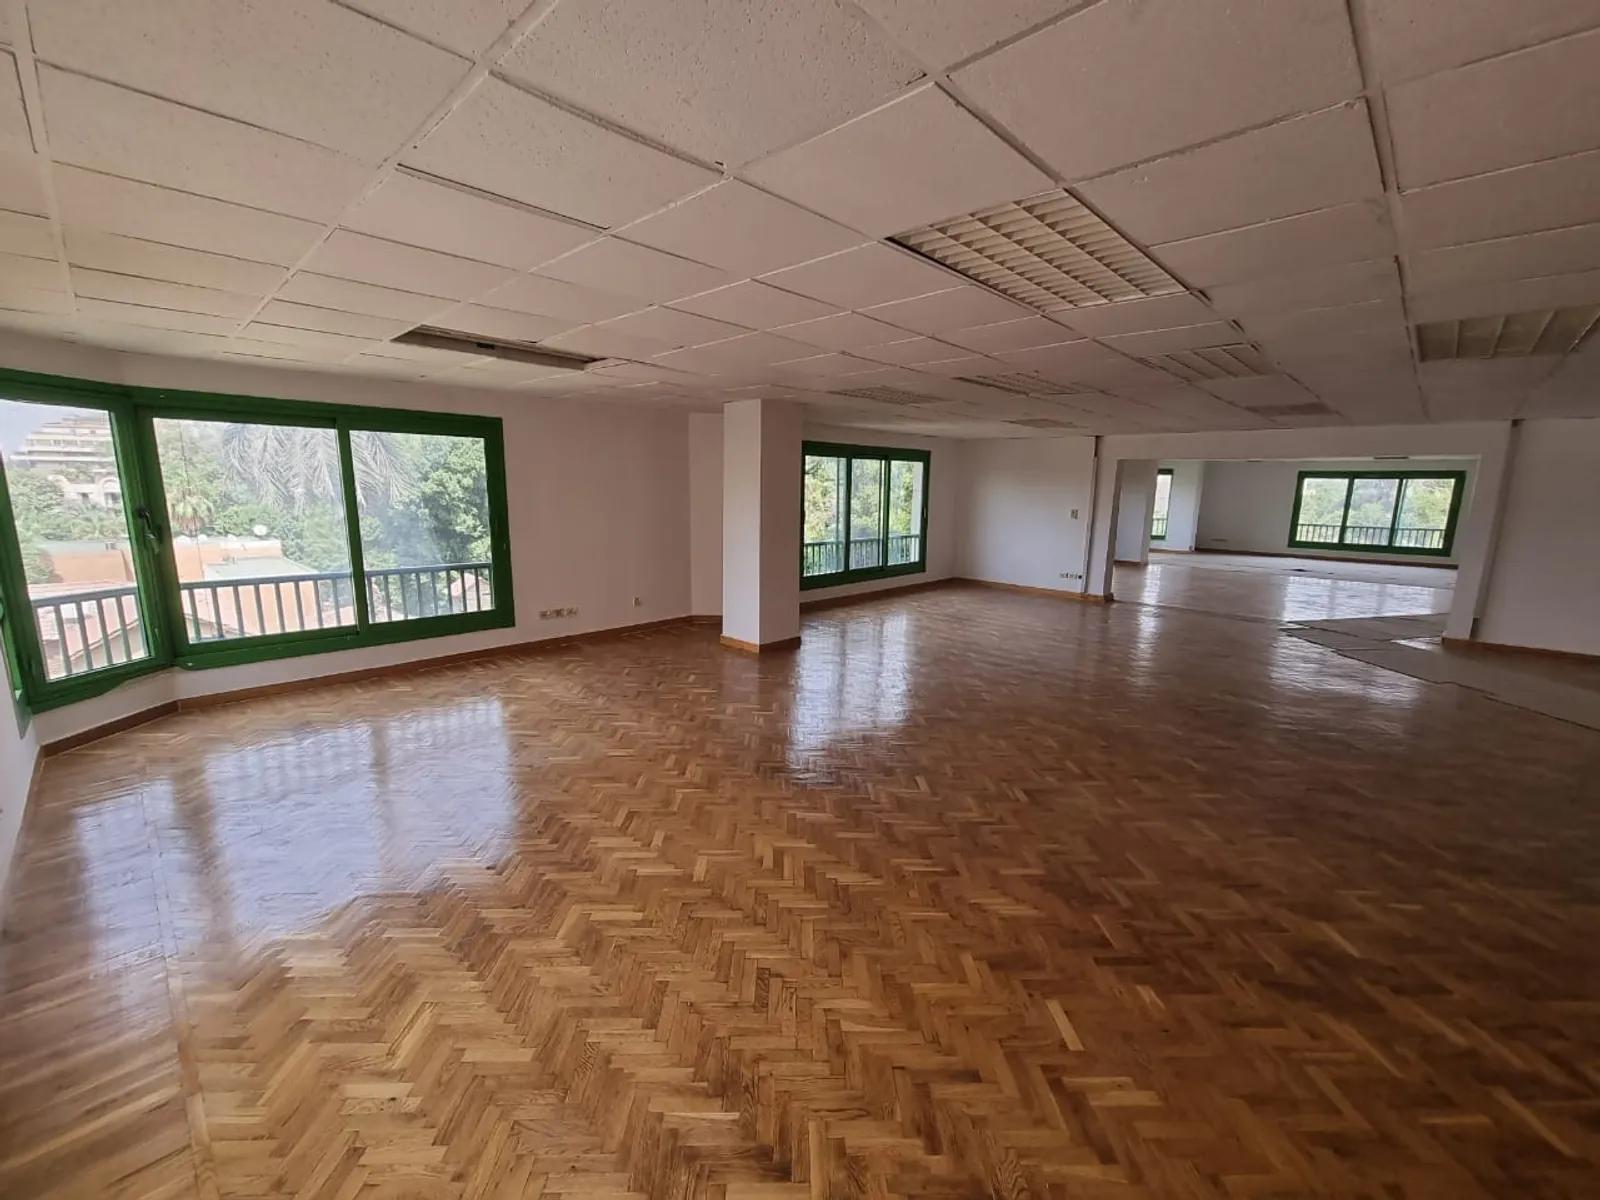 Office spaces For Sale In Maadi Maadi Sarayat Area: 700 m² consists of 8 Bedrooms 2 Bathrooms Semi furnished 5 stars #5071